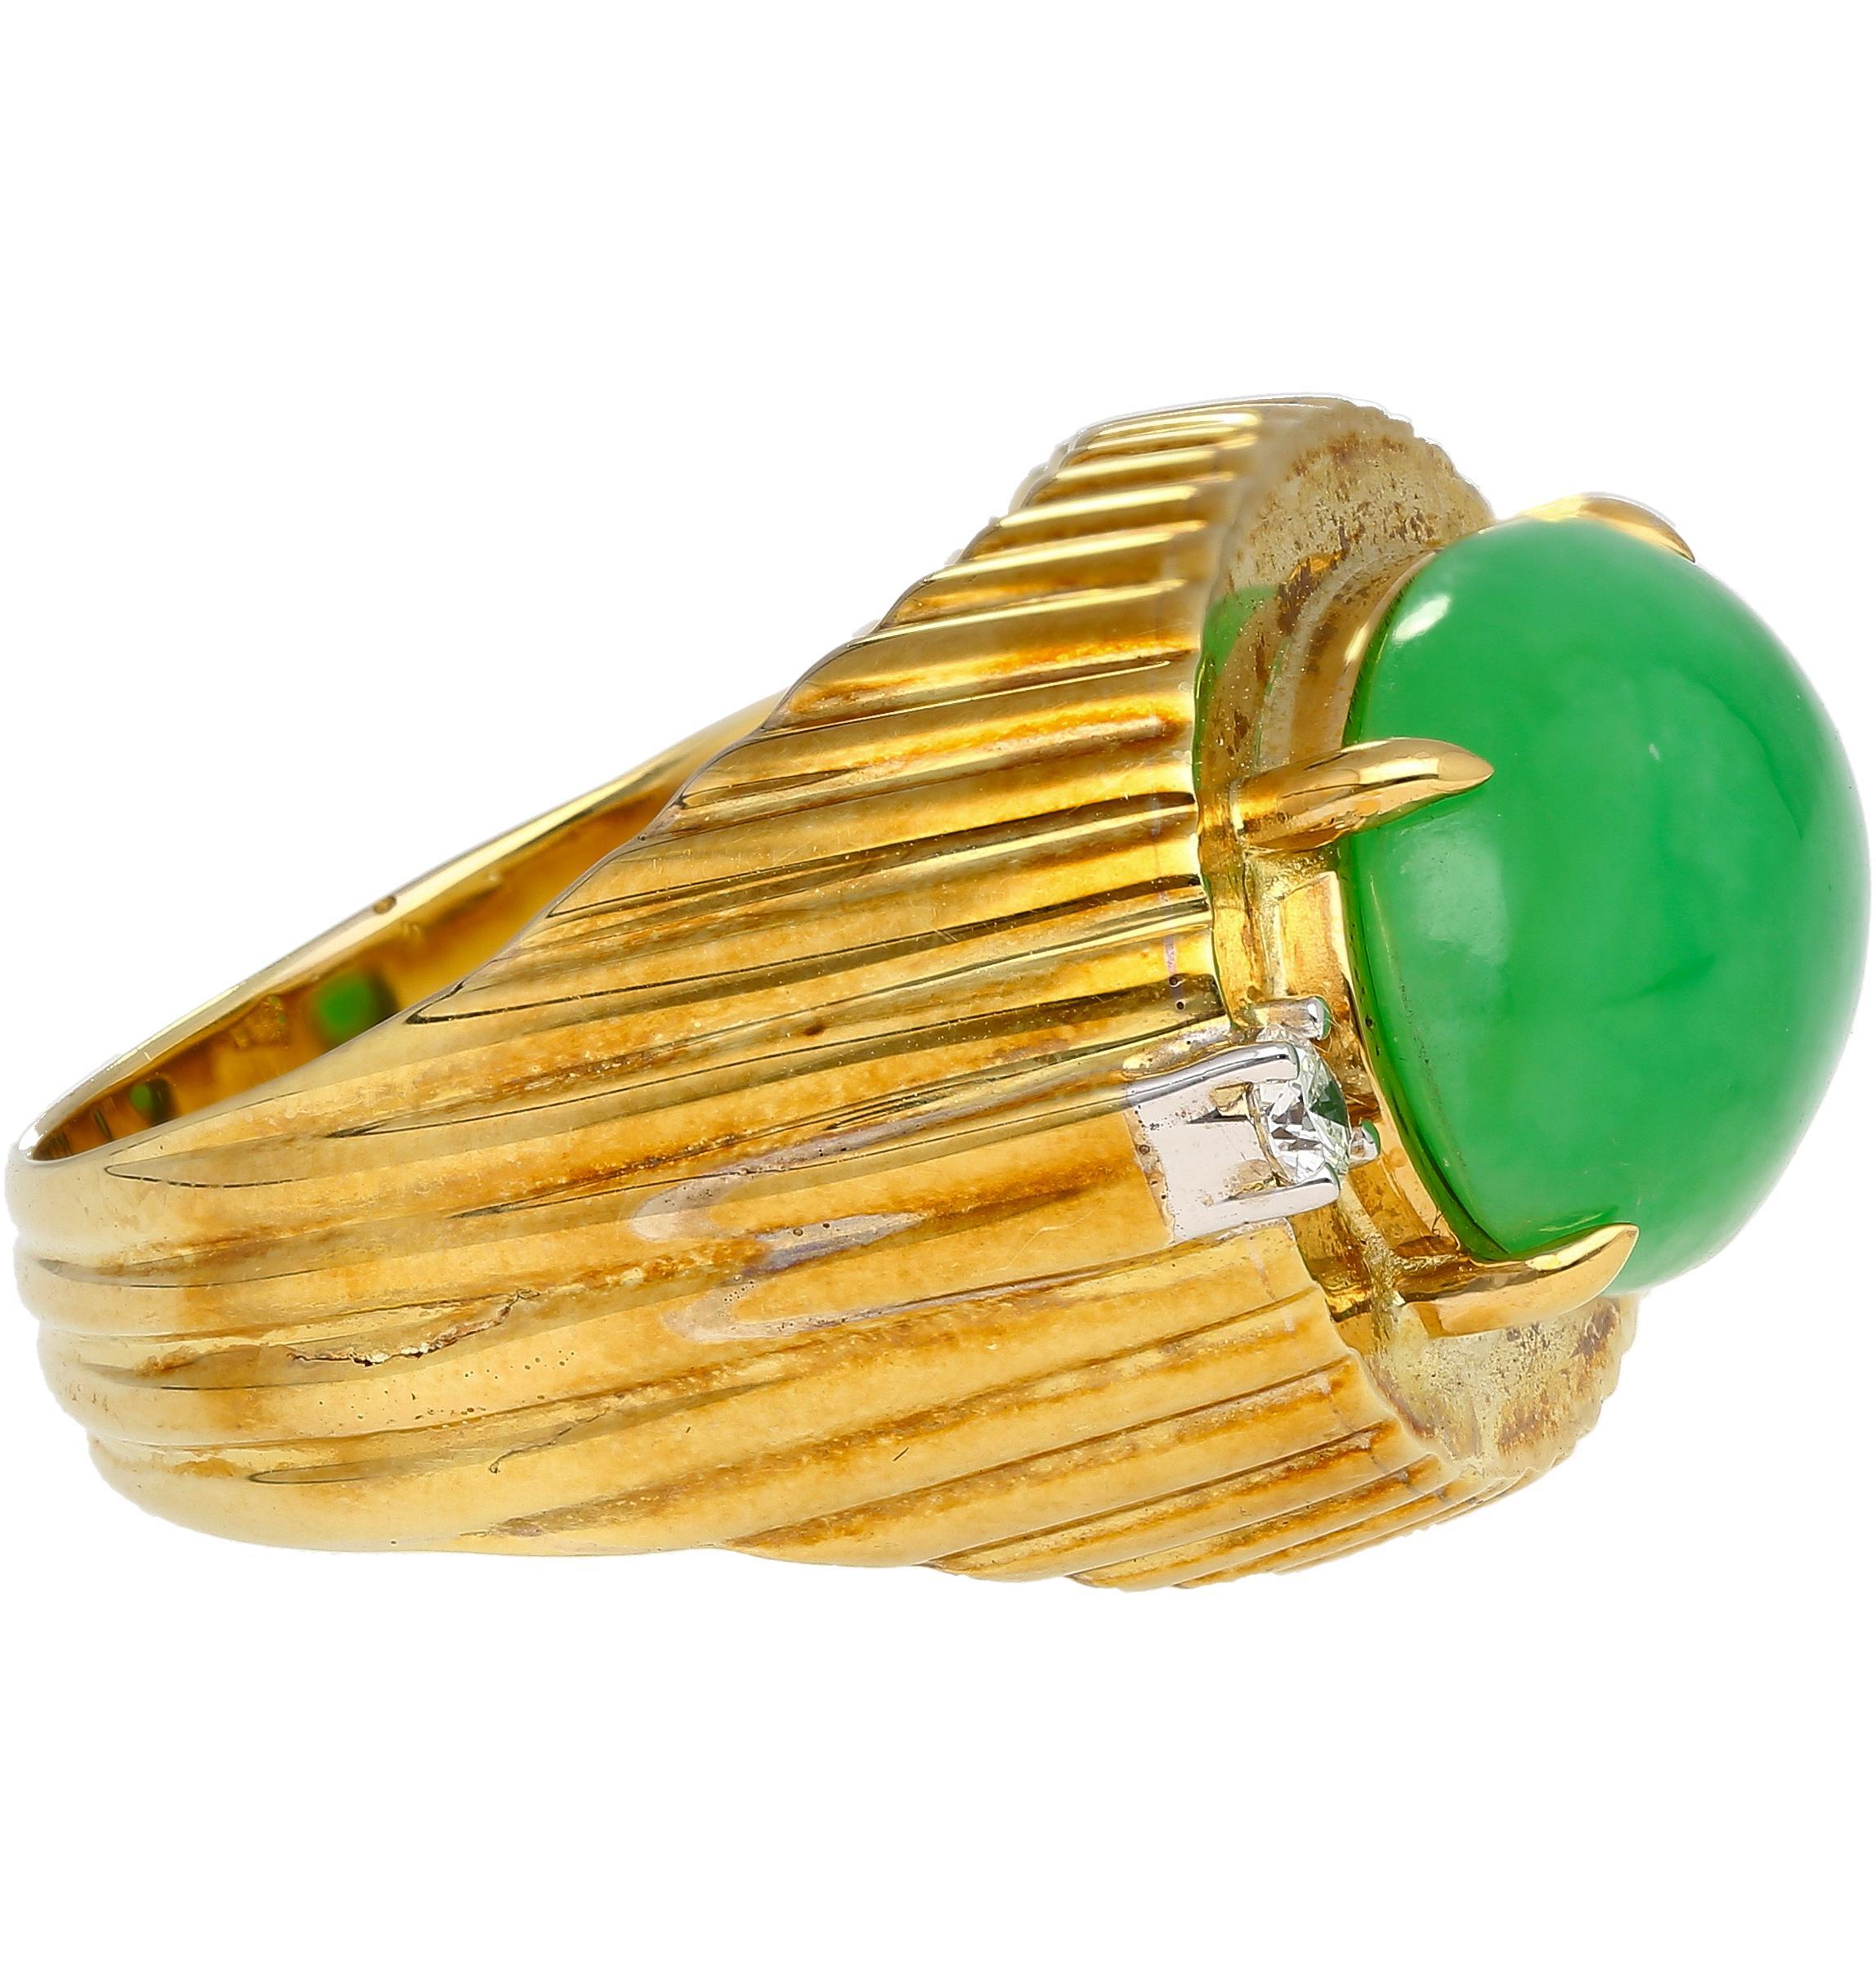 Oval Cut 9.40 Carat Type A Fei Cui Jadeite Jade and Diamond Ring in Textured 18K Gold For Sale